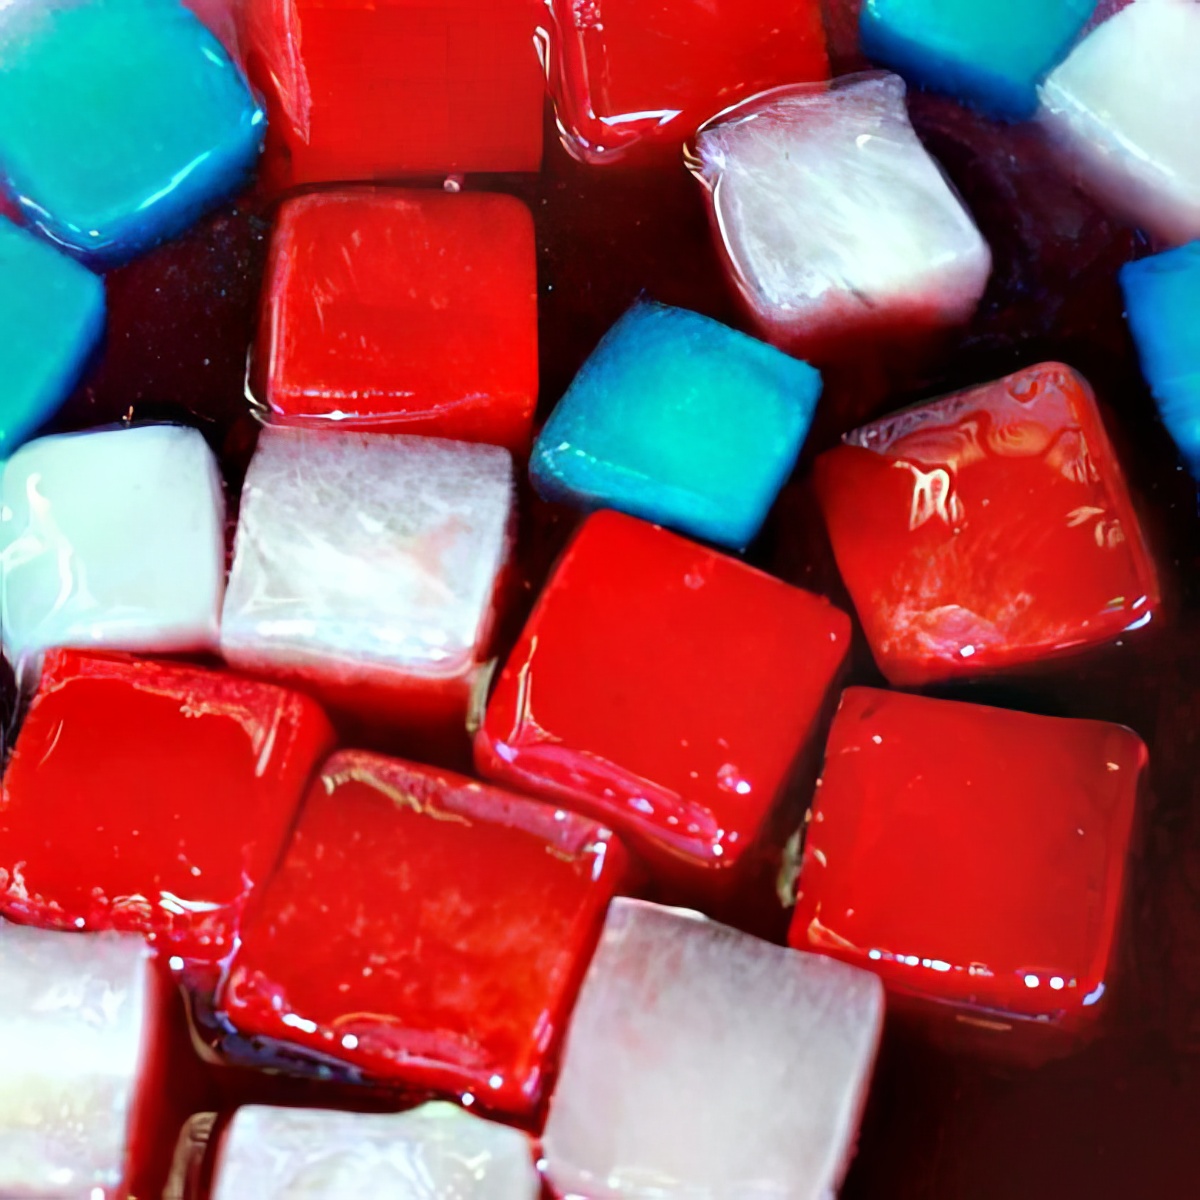 Yummy kool-aid ice activity that the whole family will surely love!